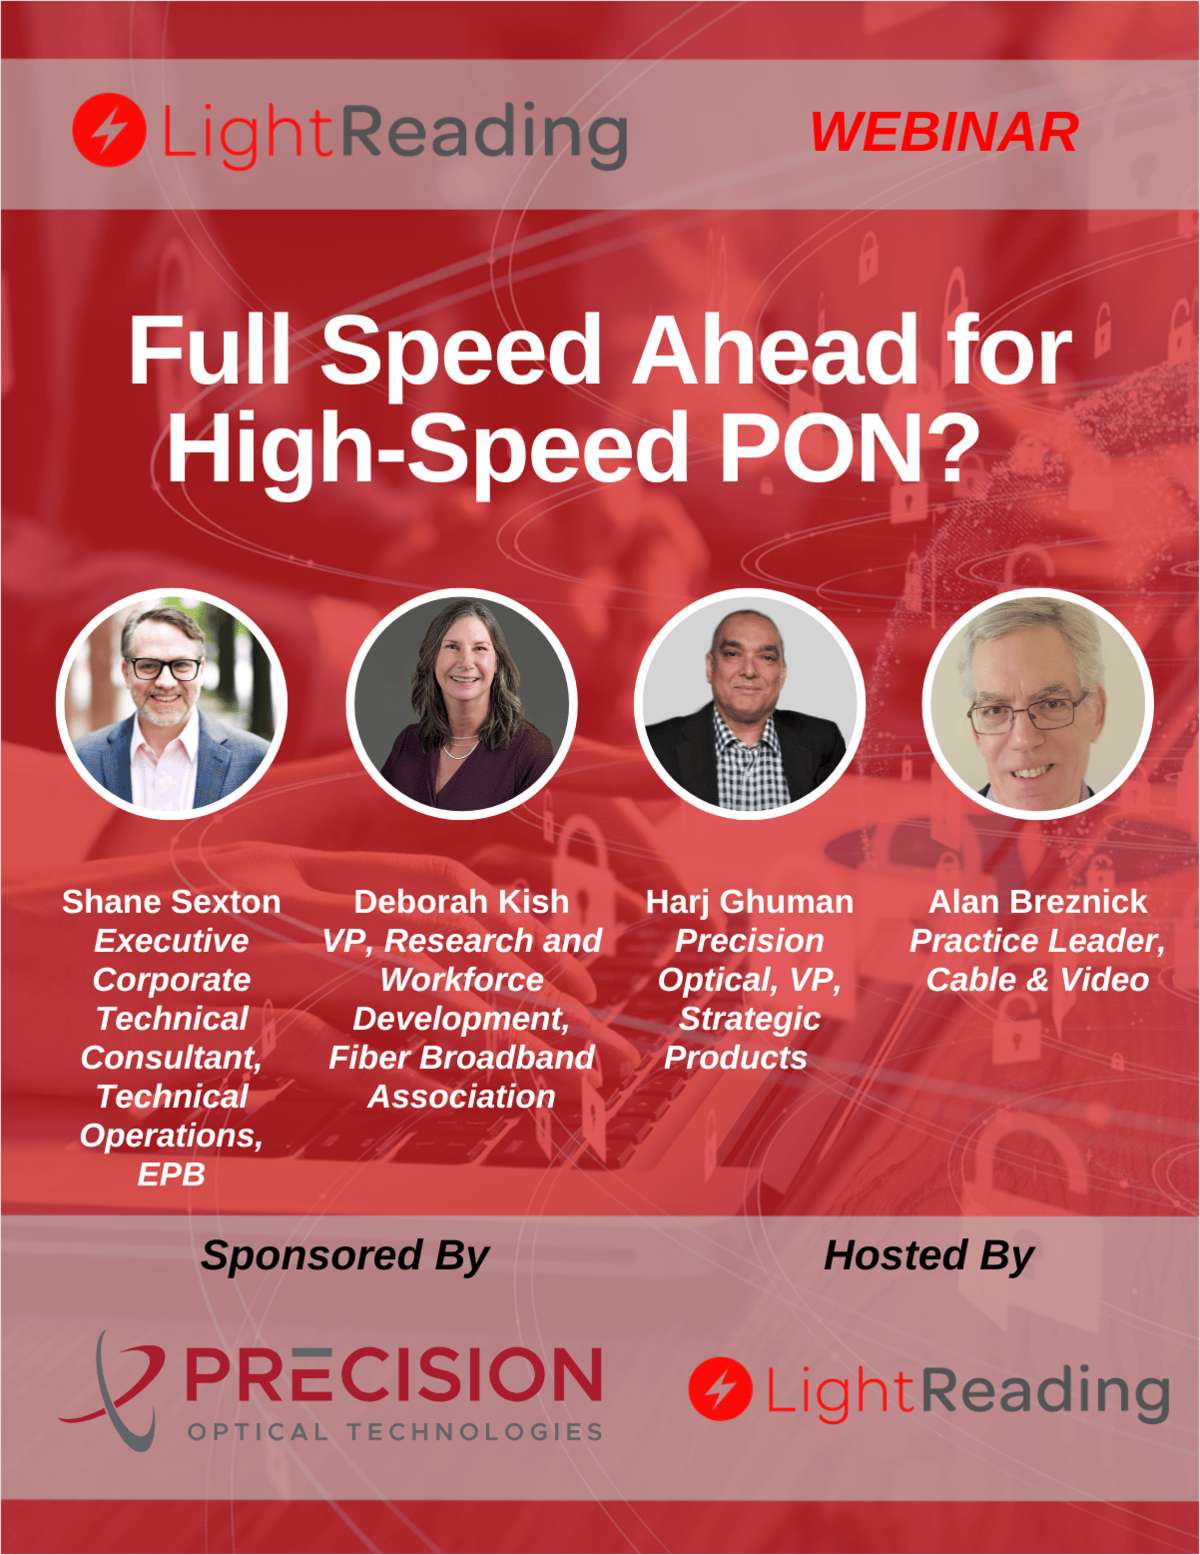 Full Speed Ahead for High-Speed PON?